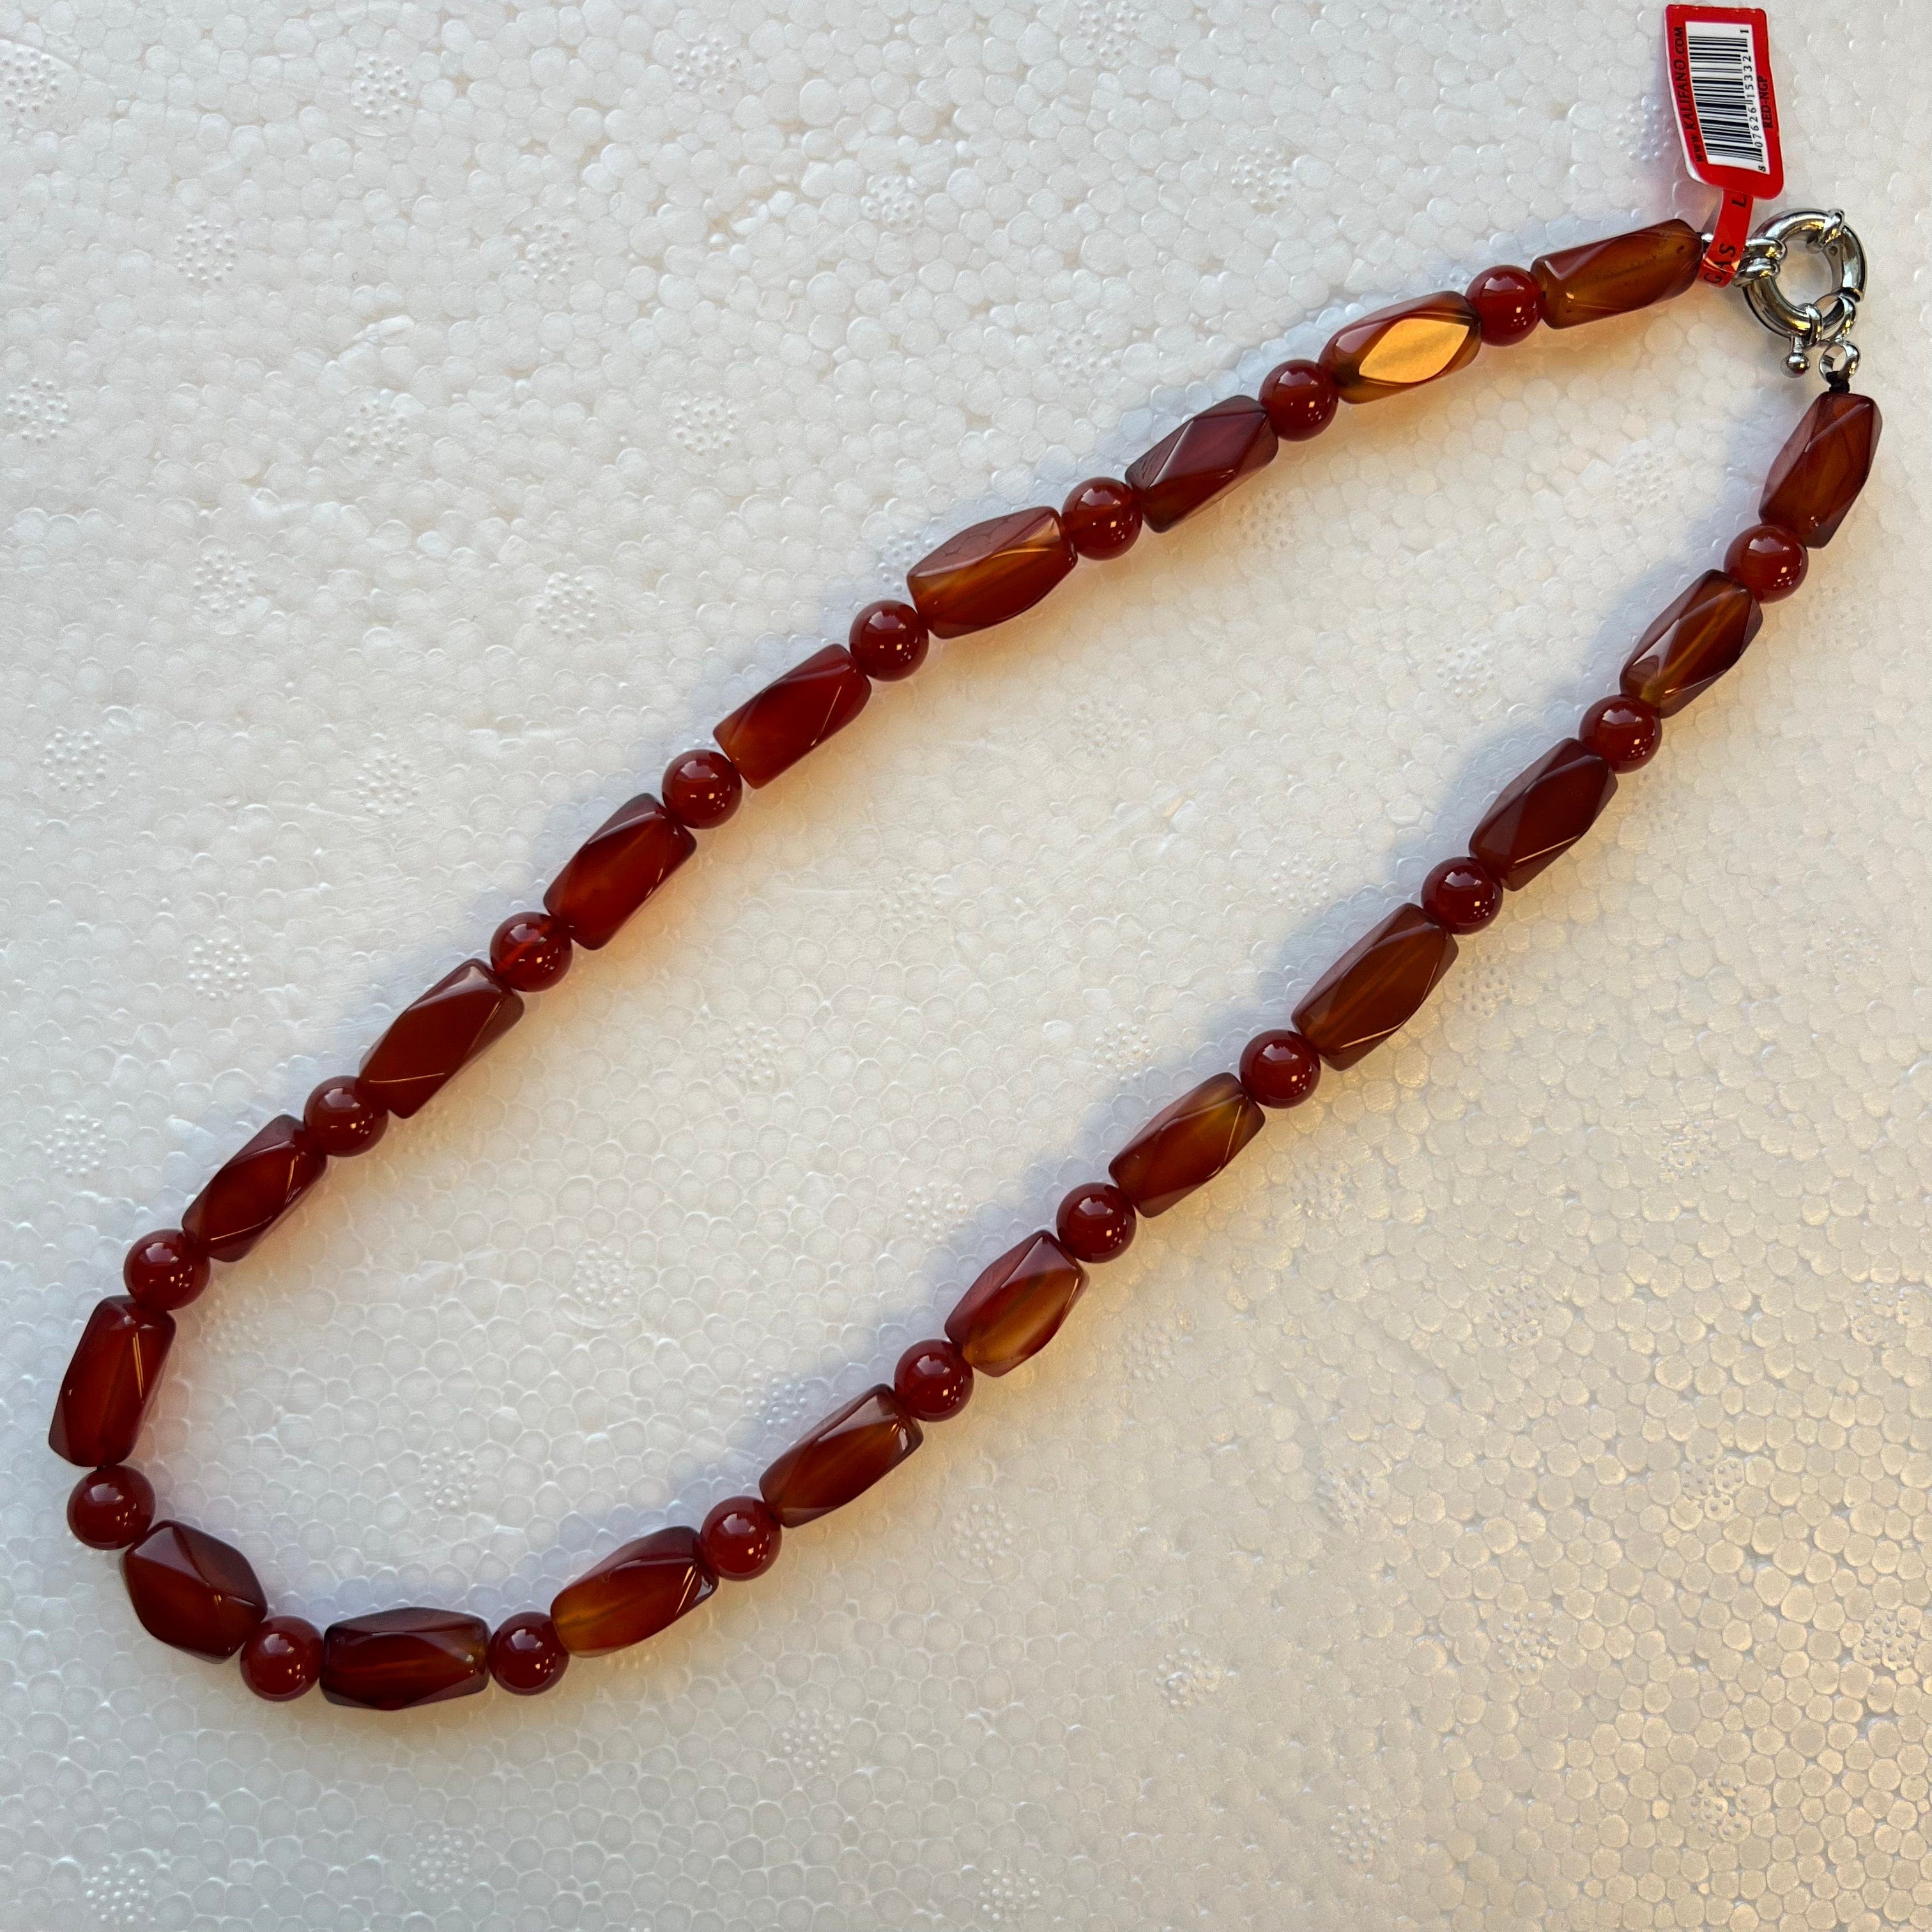 KALIFANO Gemstone Necklaces Faceted Carnelian Beads Gemstone Necklace RED-NGP-015